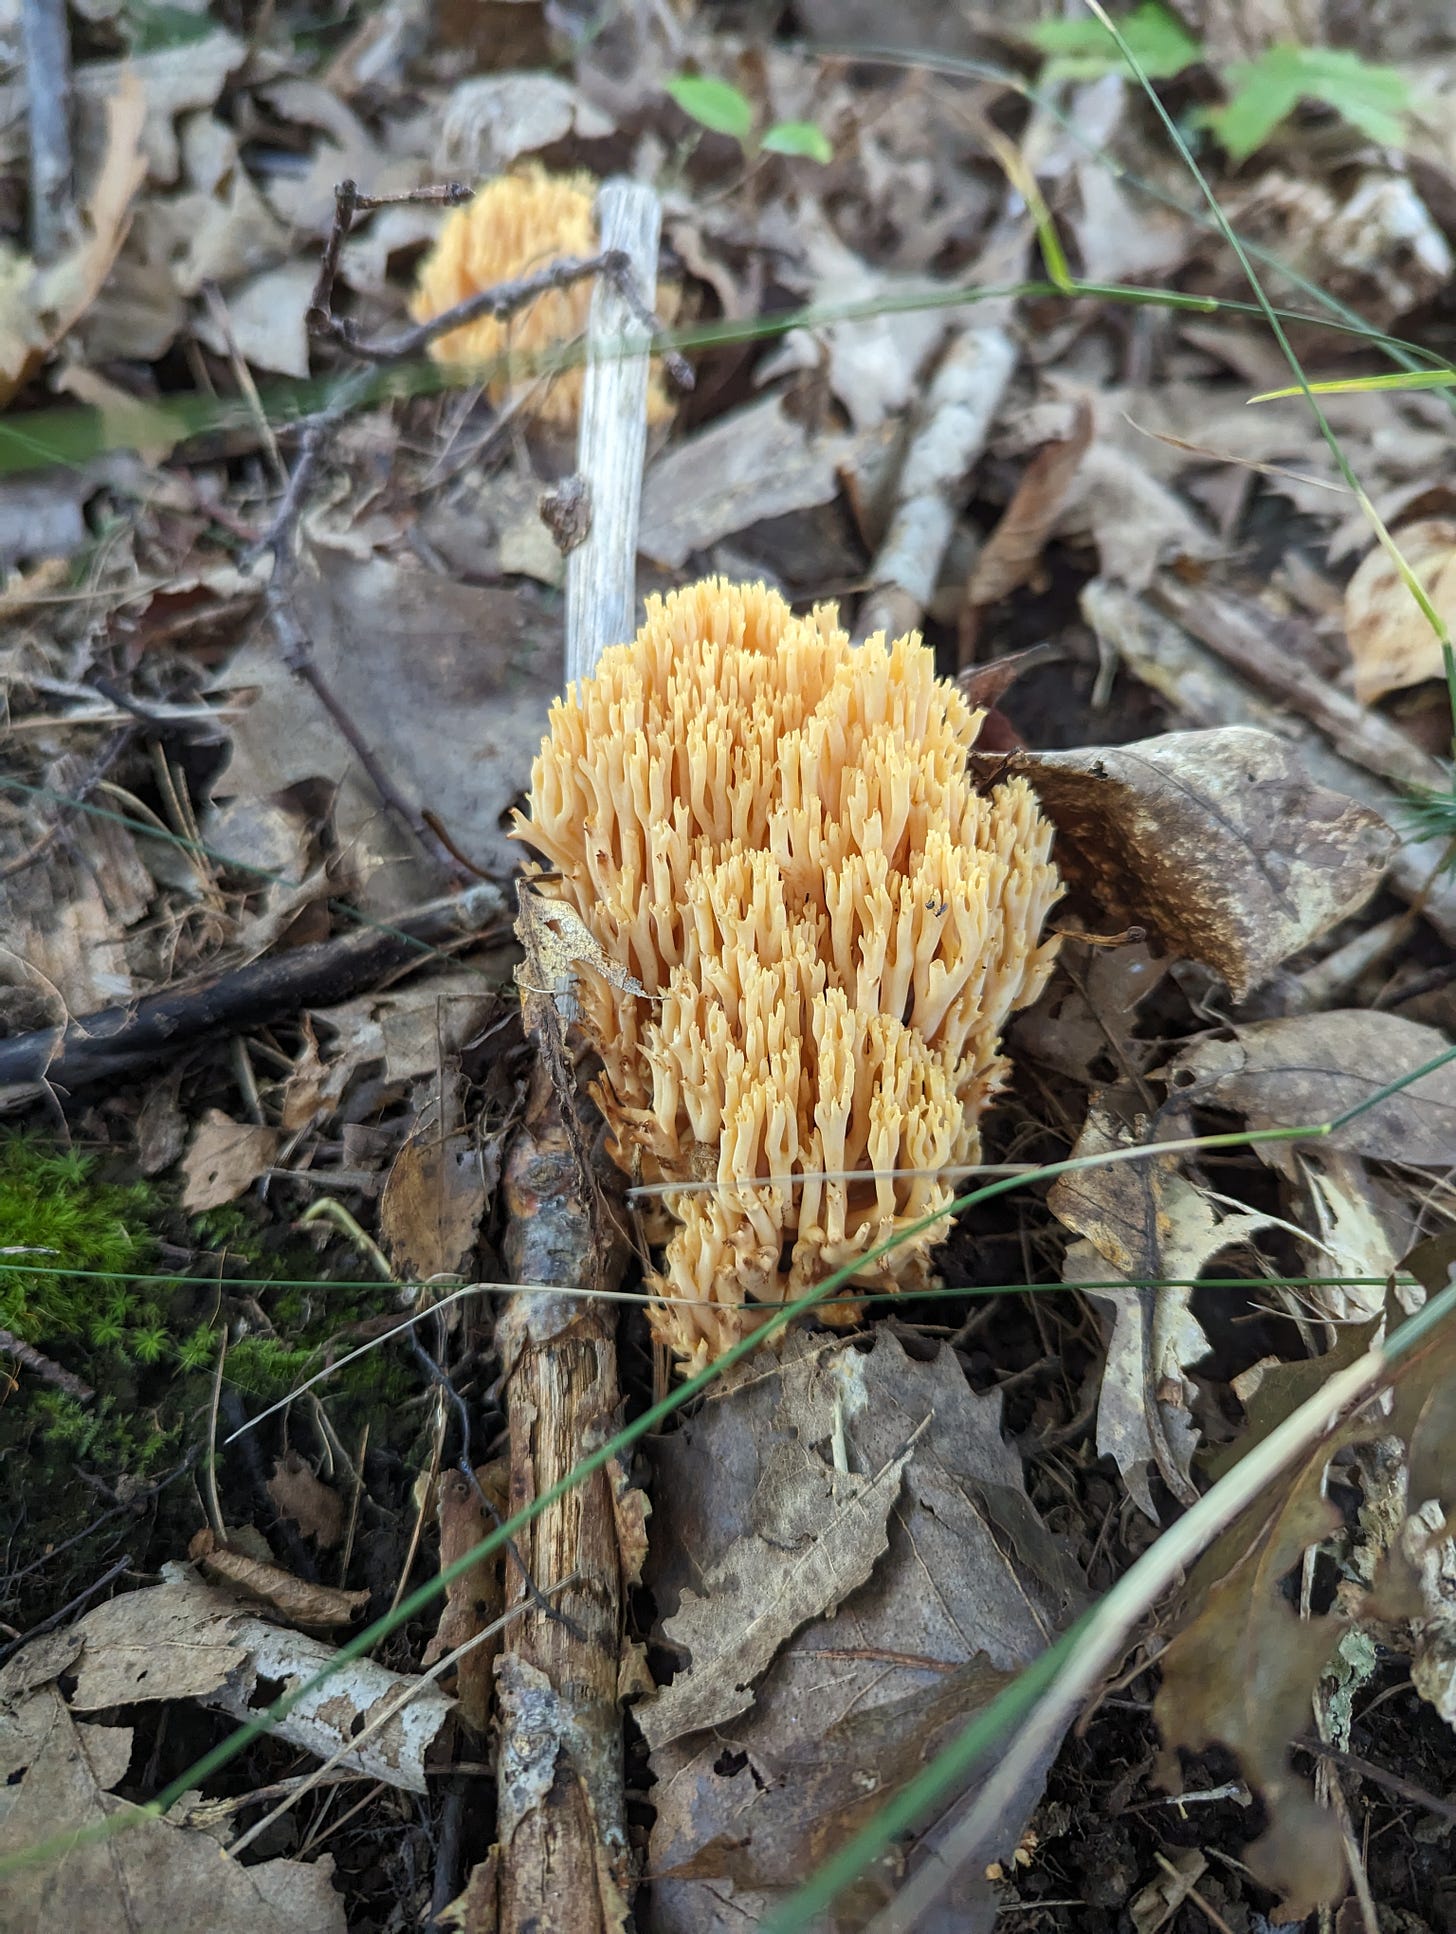 A photograph of cream-colored coral mushrooms among leaf litter on the forest floor.